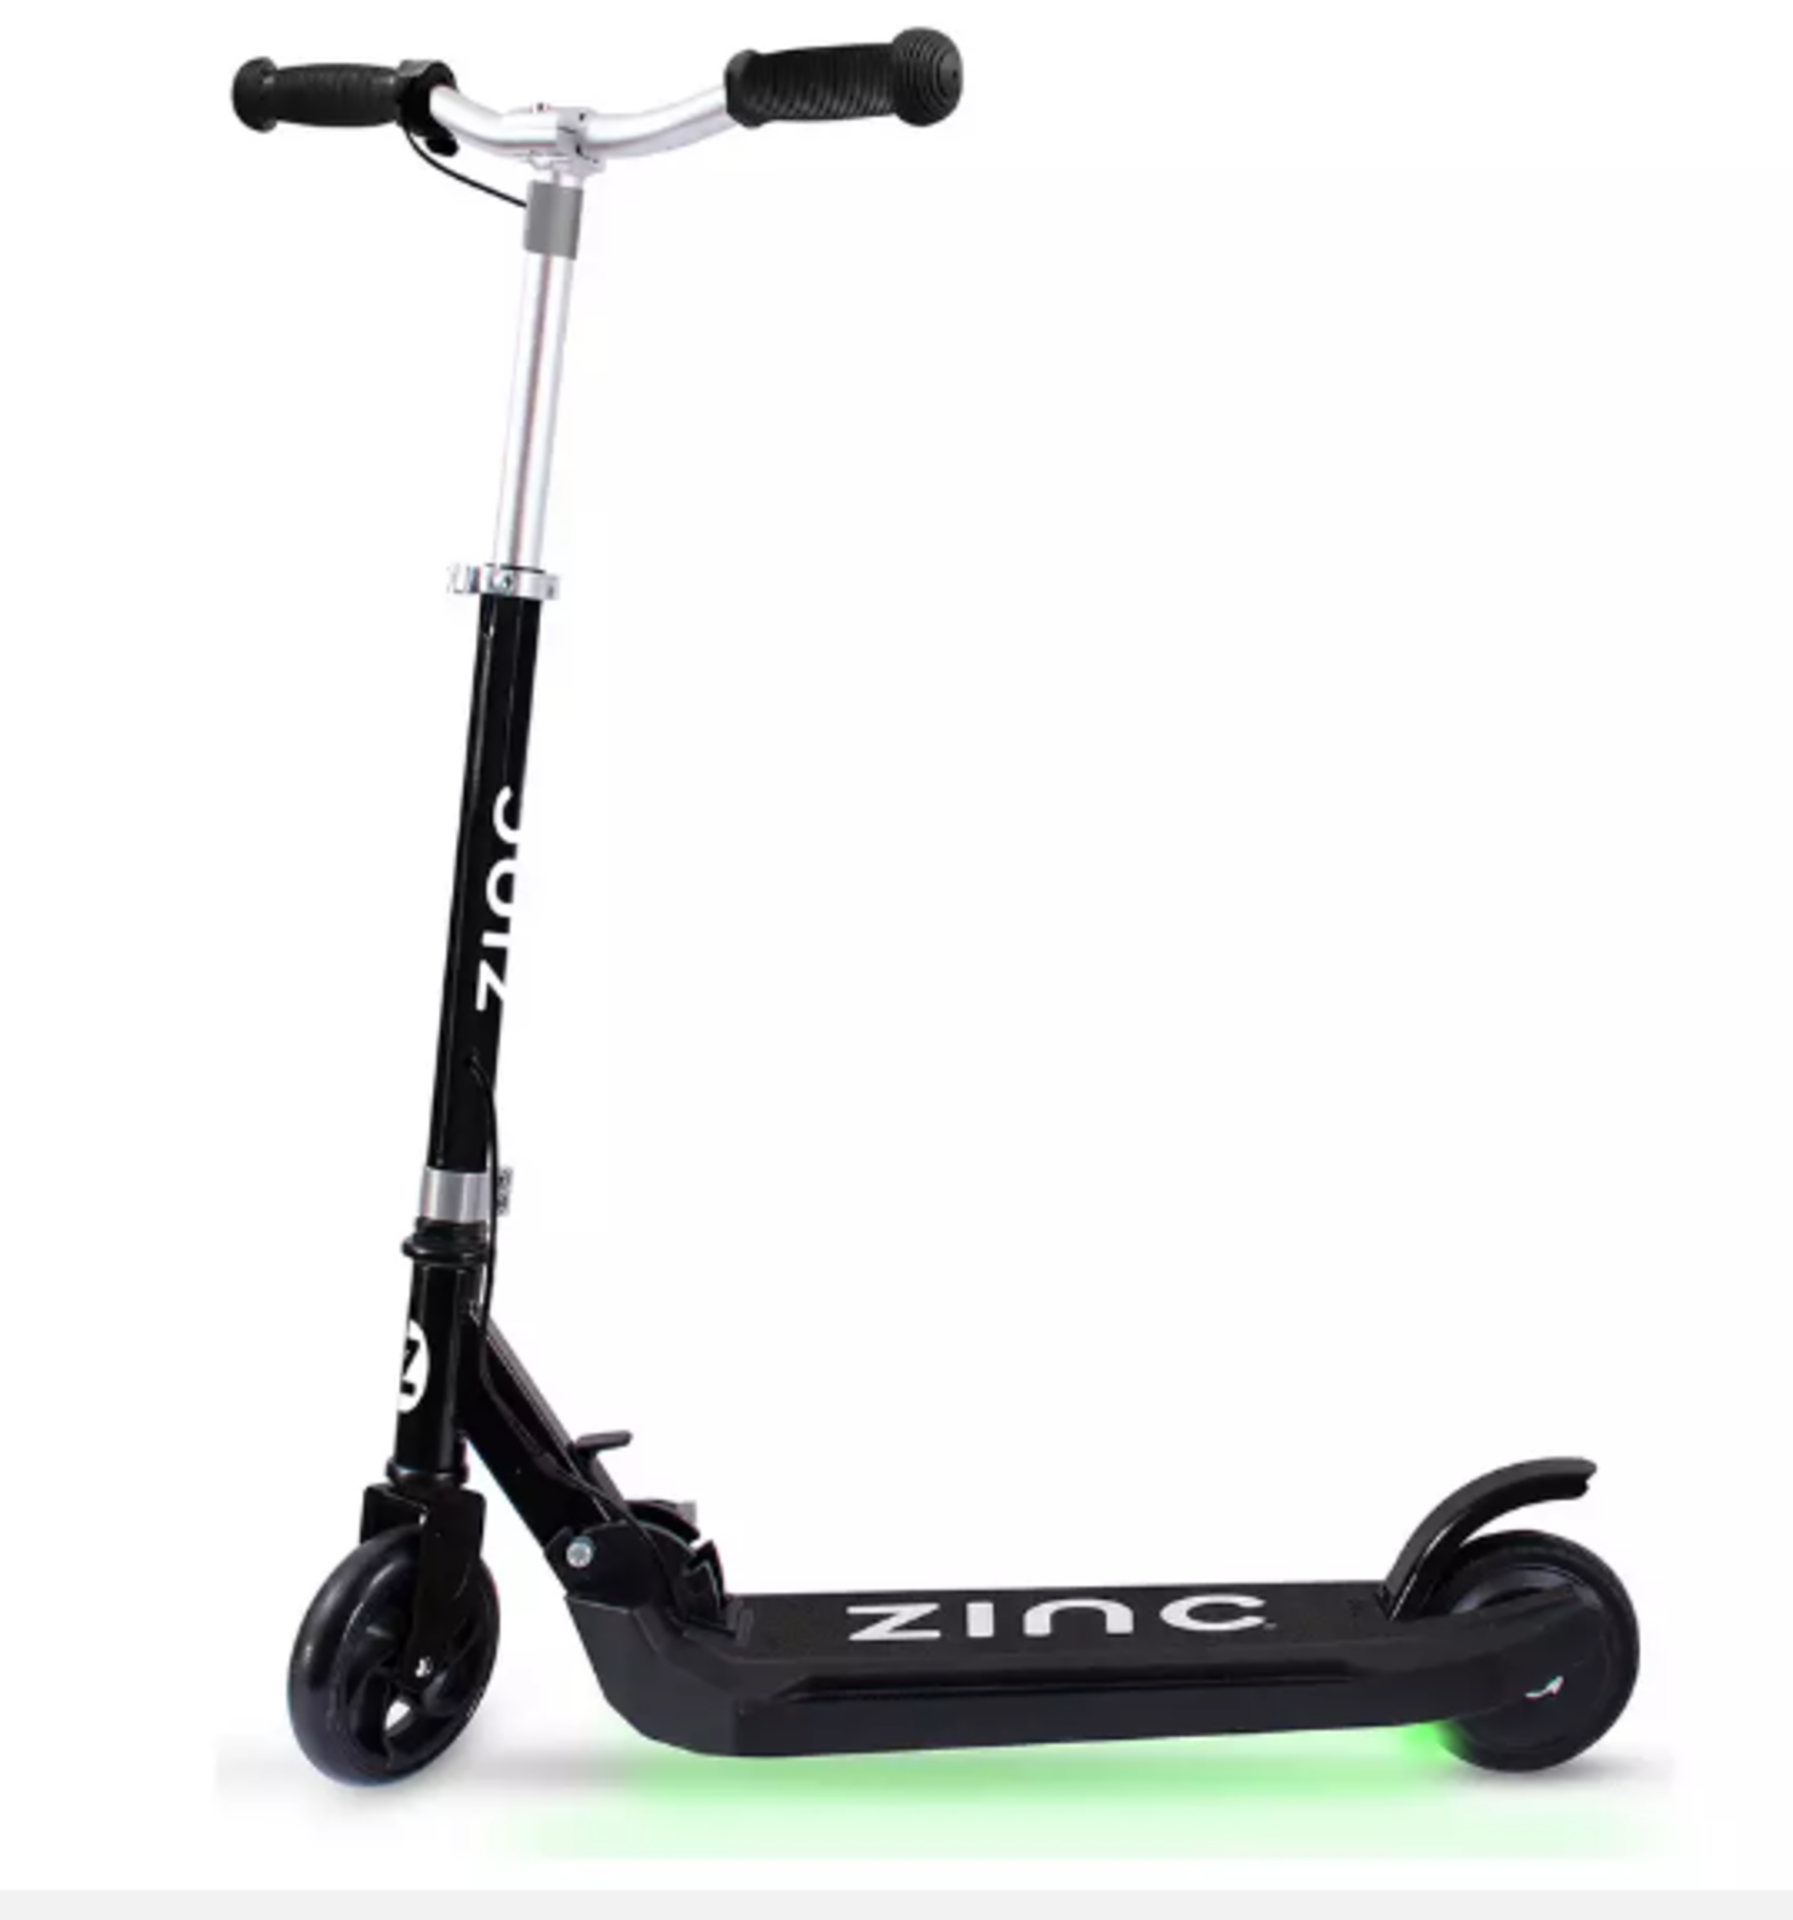 (ex53) Zinc Folding Light Up Electric E5 Scooter. RRP £195.00. There is tons of fun to be had with